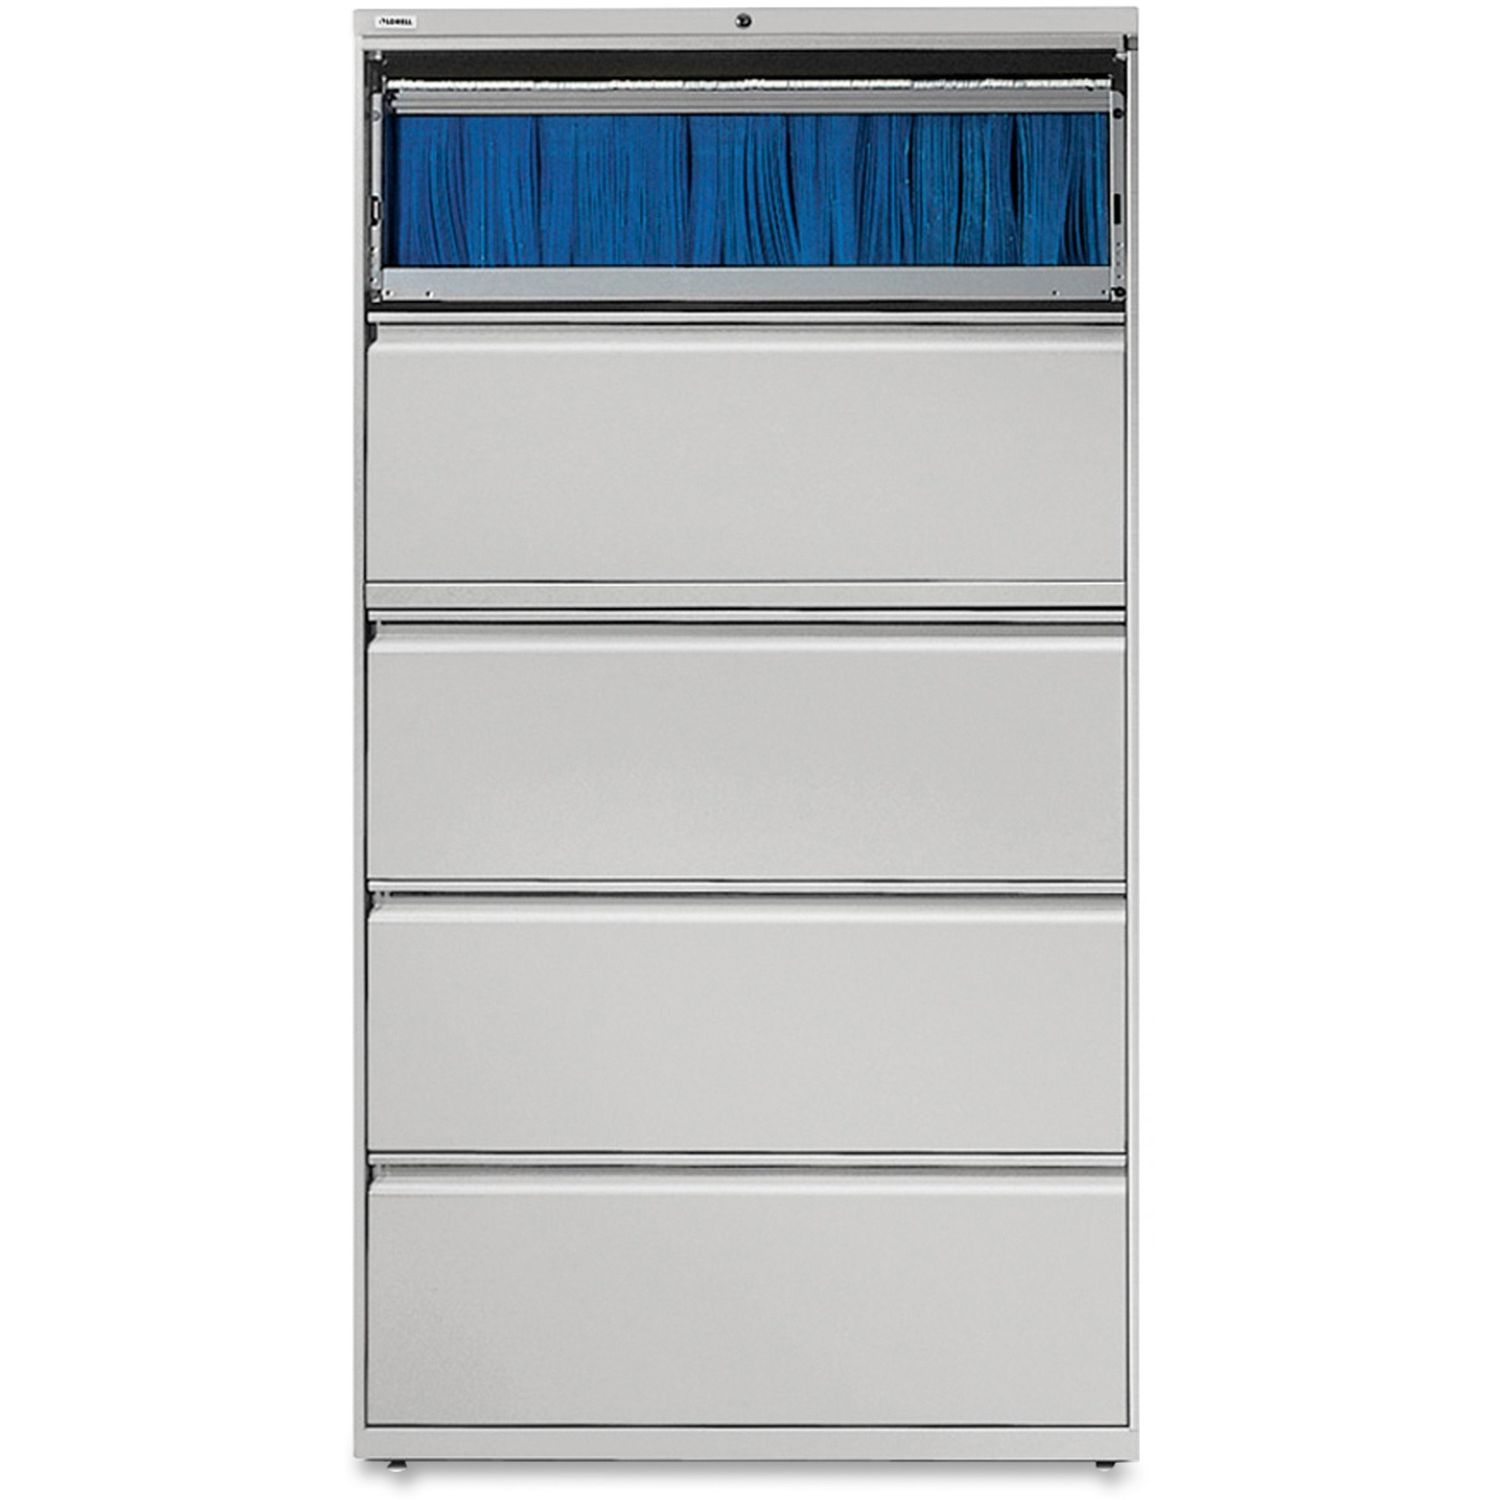 Lateral File - 5-Drawer 36" x 18.6" x 67.7", 5 x Drawer(s) for File, Legal, Letter, A4, Lateral, Rust Proof, Leveling Glide, Interlocking, Ball-bearing Suspension, Label Holder, Light Gray